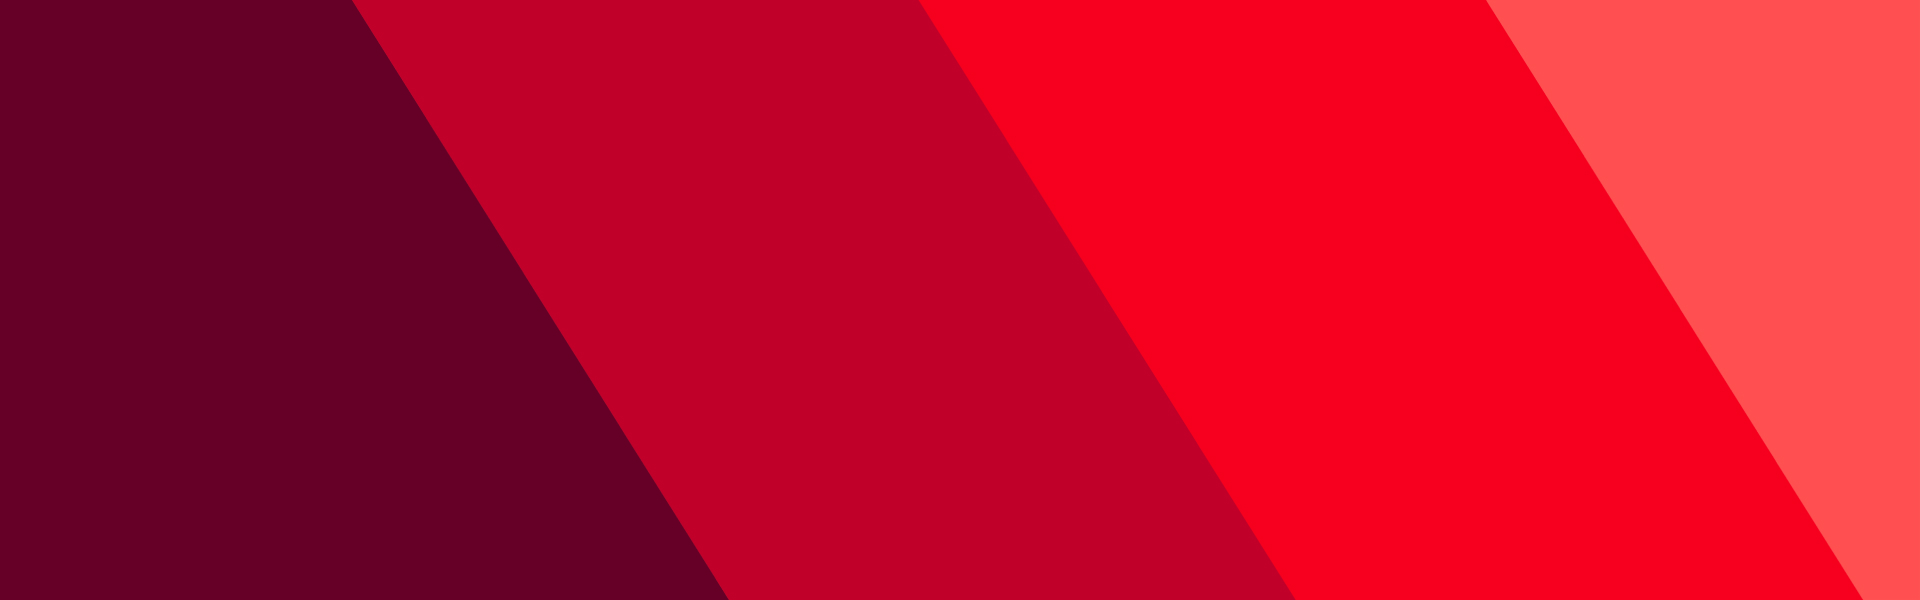 A banner with 4 gradient shades of red.